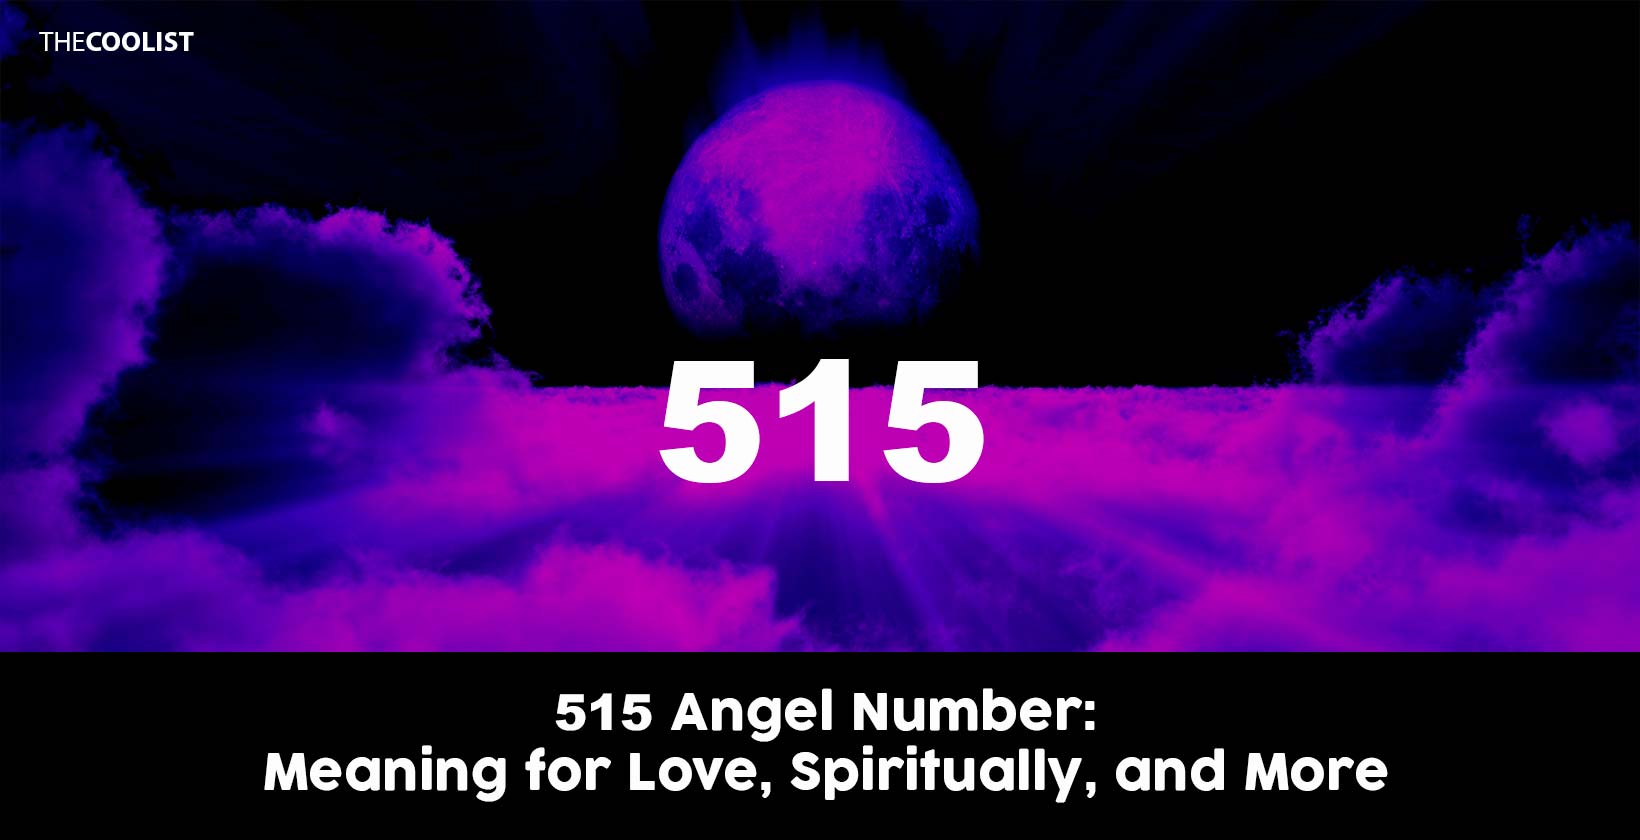 515 Angel Number: Meaning for Love, Spirituality, and More